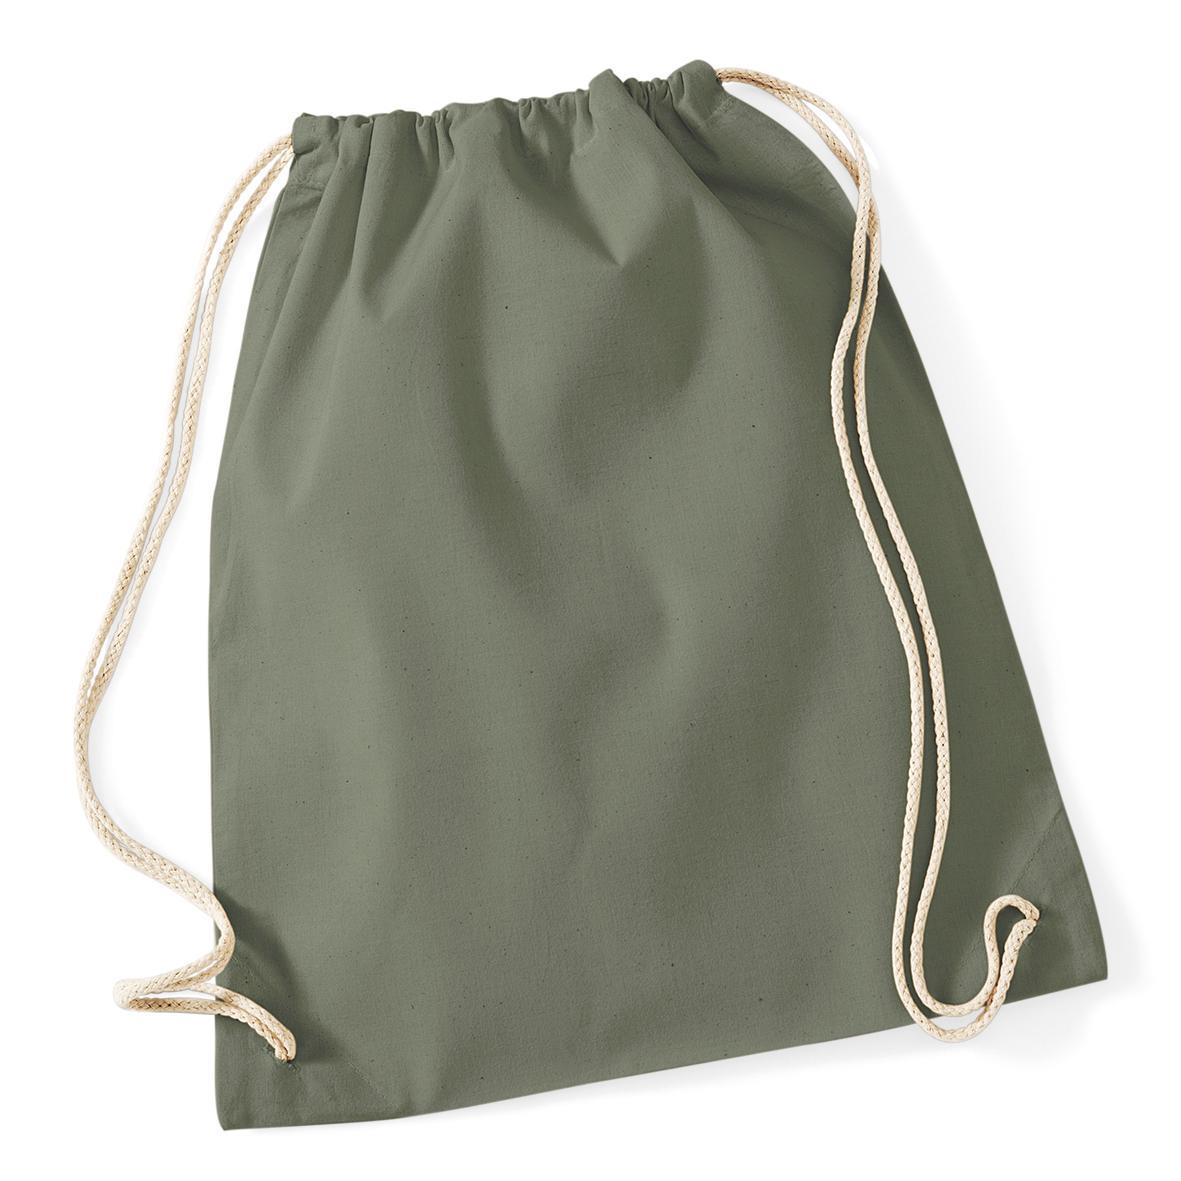 Westford Mill Cotton Gymsac Bag - 12 Litres (Pack of 2) (Olive) (One Size)